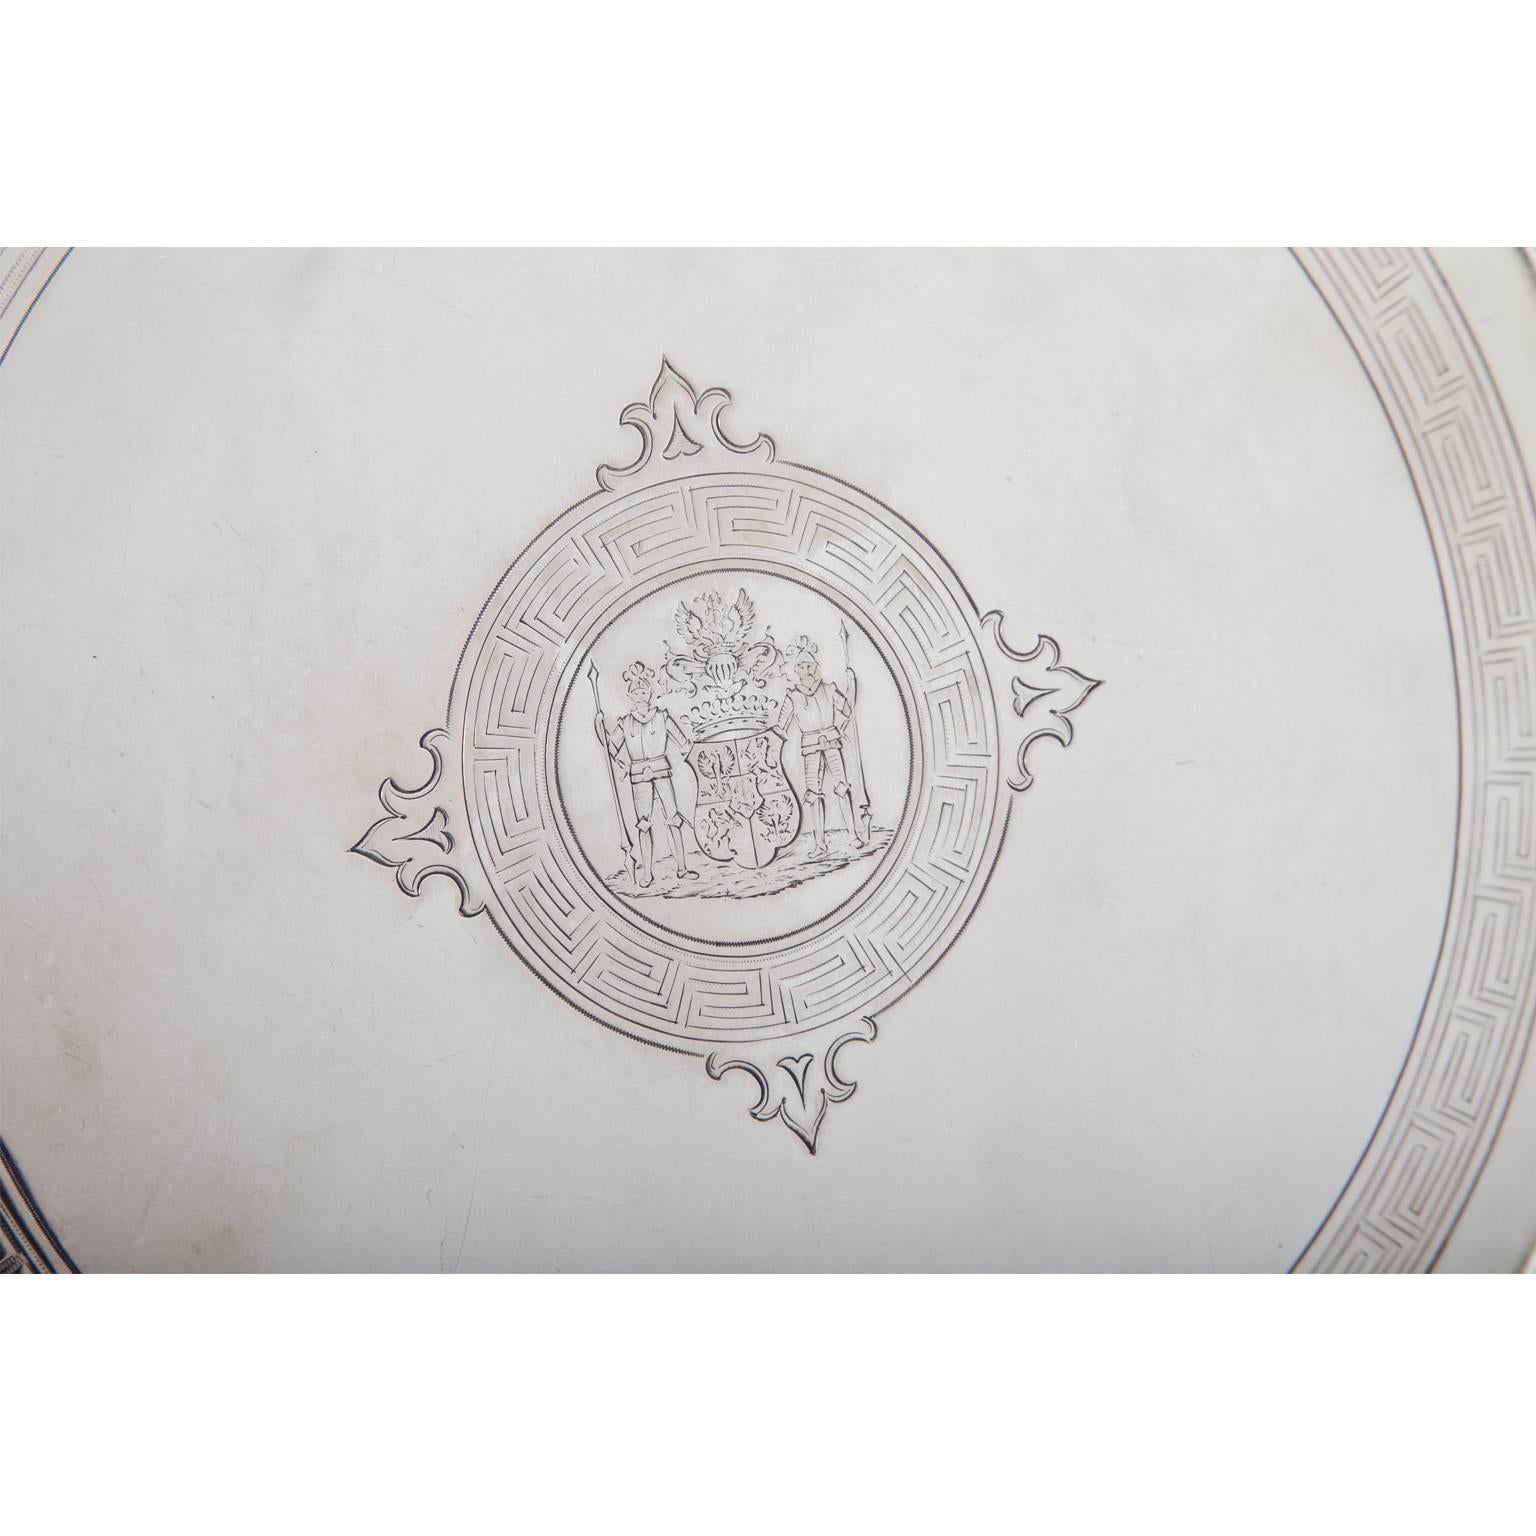 Large silver plate with the coat of arms of the Westarp Family (nominated as Prussian Counts in 1810) on the well and a revolving Meander ornament. Embossed at the back for Berlin, circa 1870, F, and WILM, president at the time was Hermann Julius